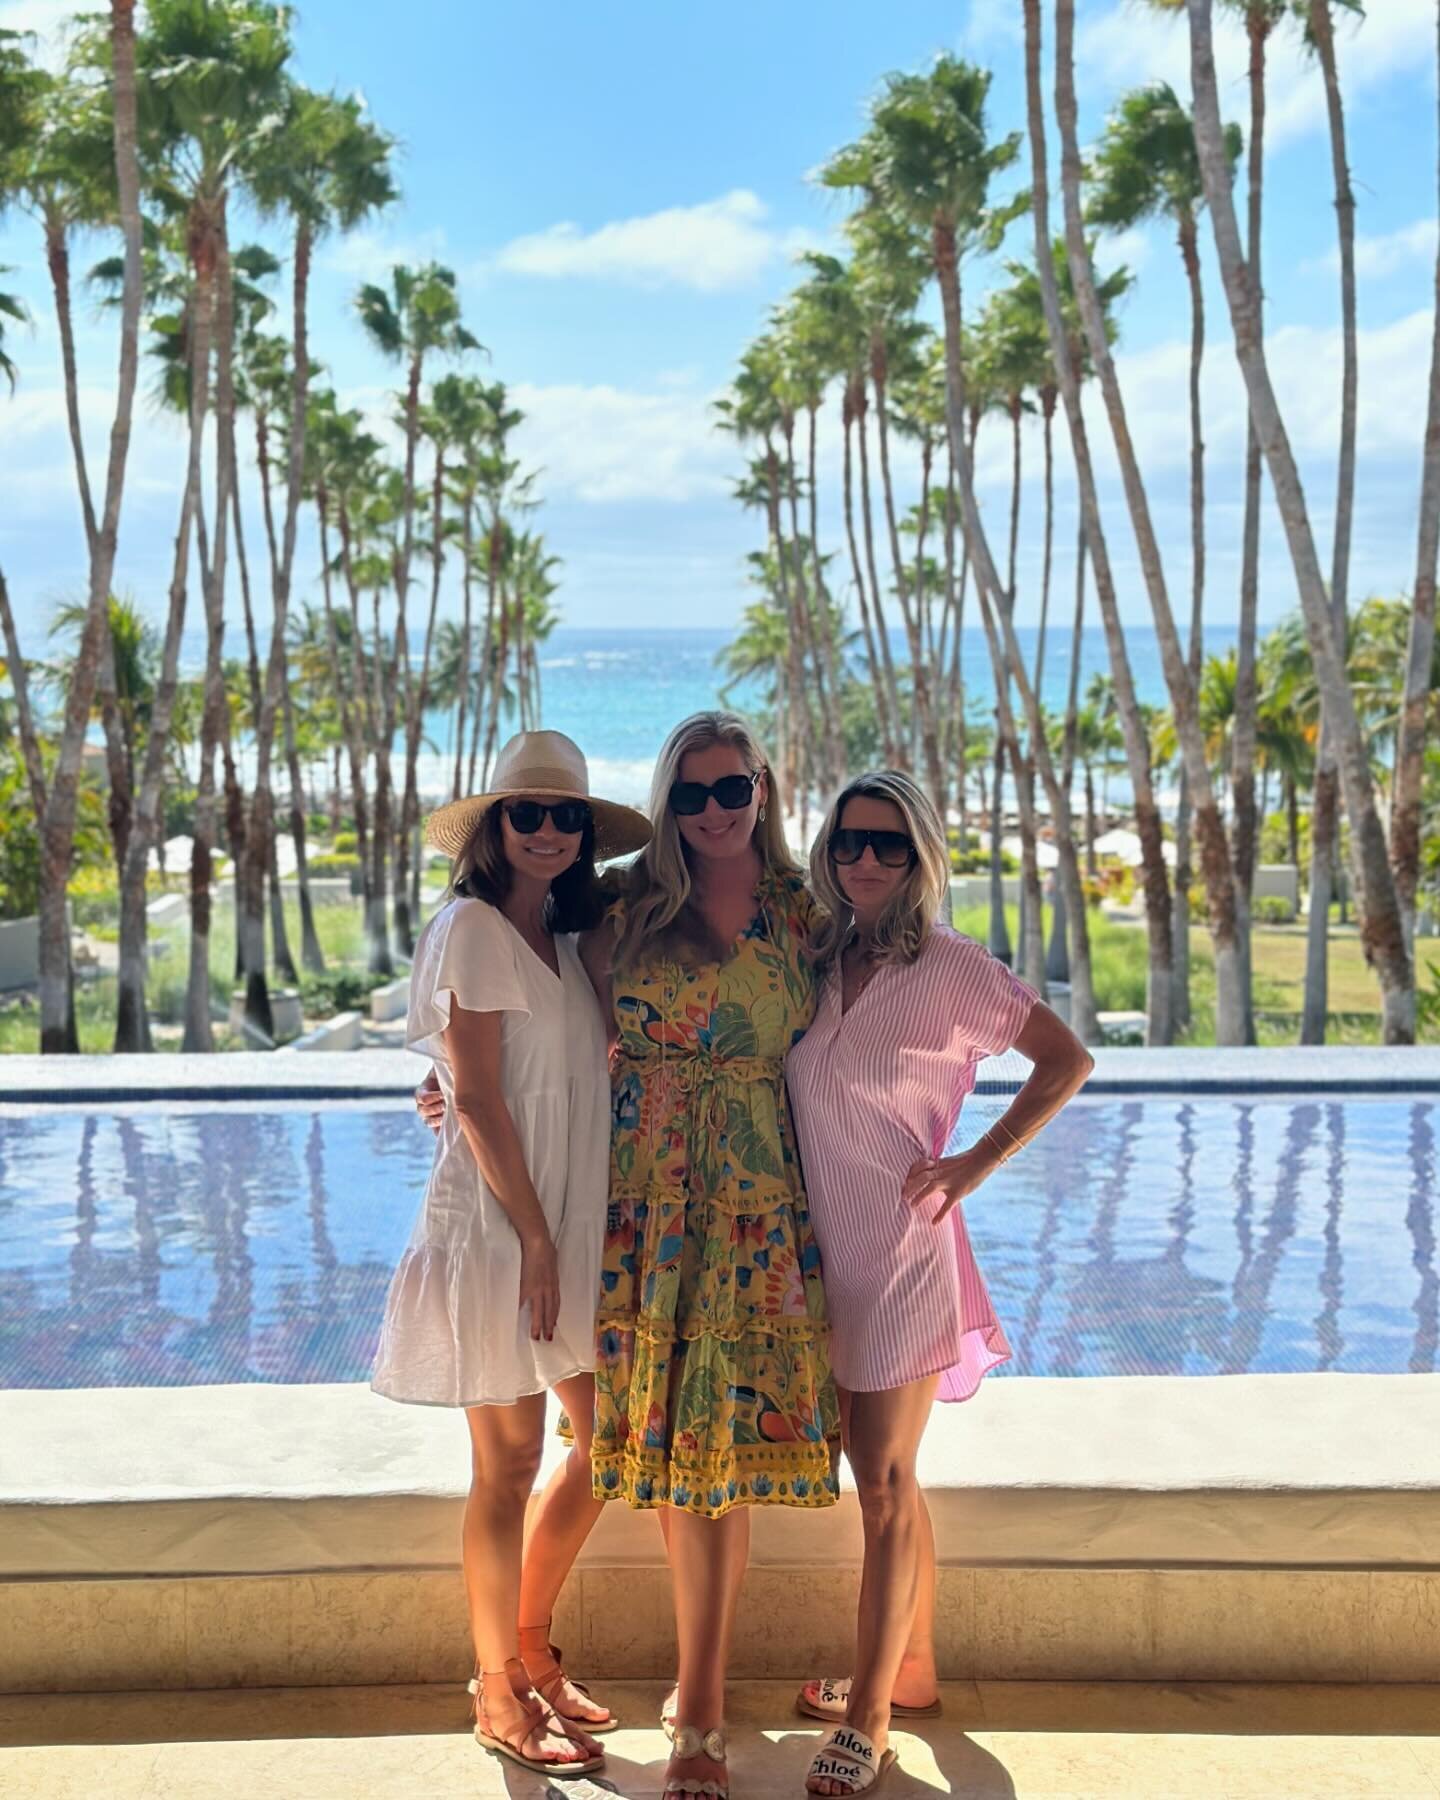 Punta Mita exceeded all of my expectations, after years of trying to visit this destination, it finally happened! The newly renovated St. Regis Punta Mita was absolutely beautiful, and the service was beyond incredible. The casitas are spacious with 